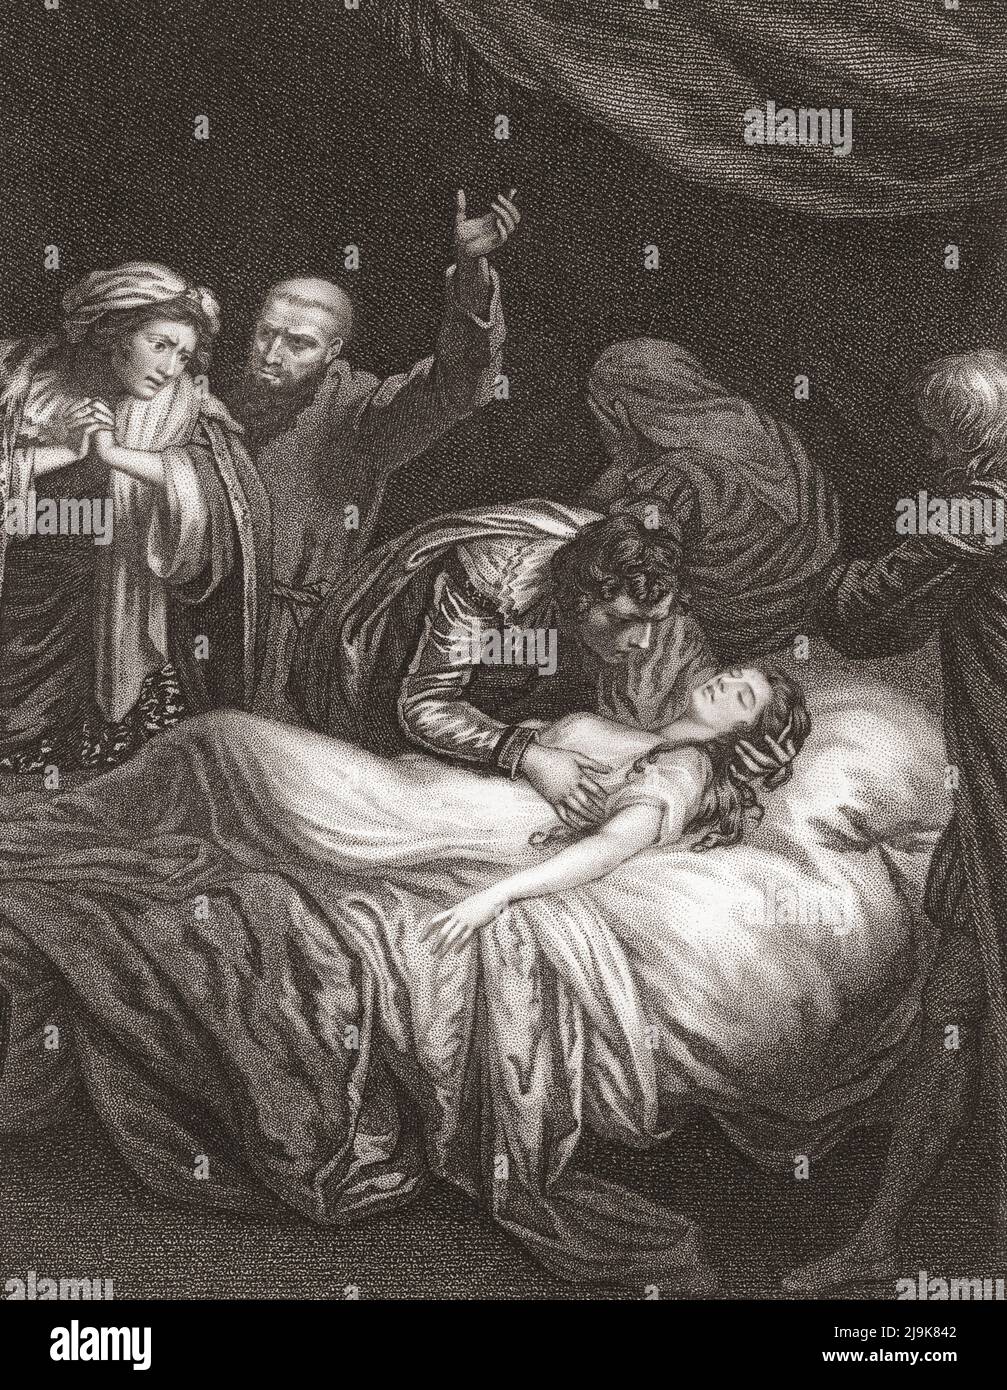 The Nurse has found Juliet sleeping from the effects of a potion and believes her dead, as do her parents.  Only Friar Lawrence knows the truth and he cannot tell the truth.  From William Shakespeare's play Romeo and Juliet, Act IV, Scene V.   Detail of a 1792 engraving by Peter Simon from the painting by John Opie. Stock Photo